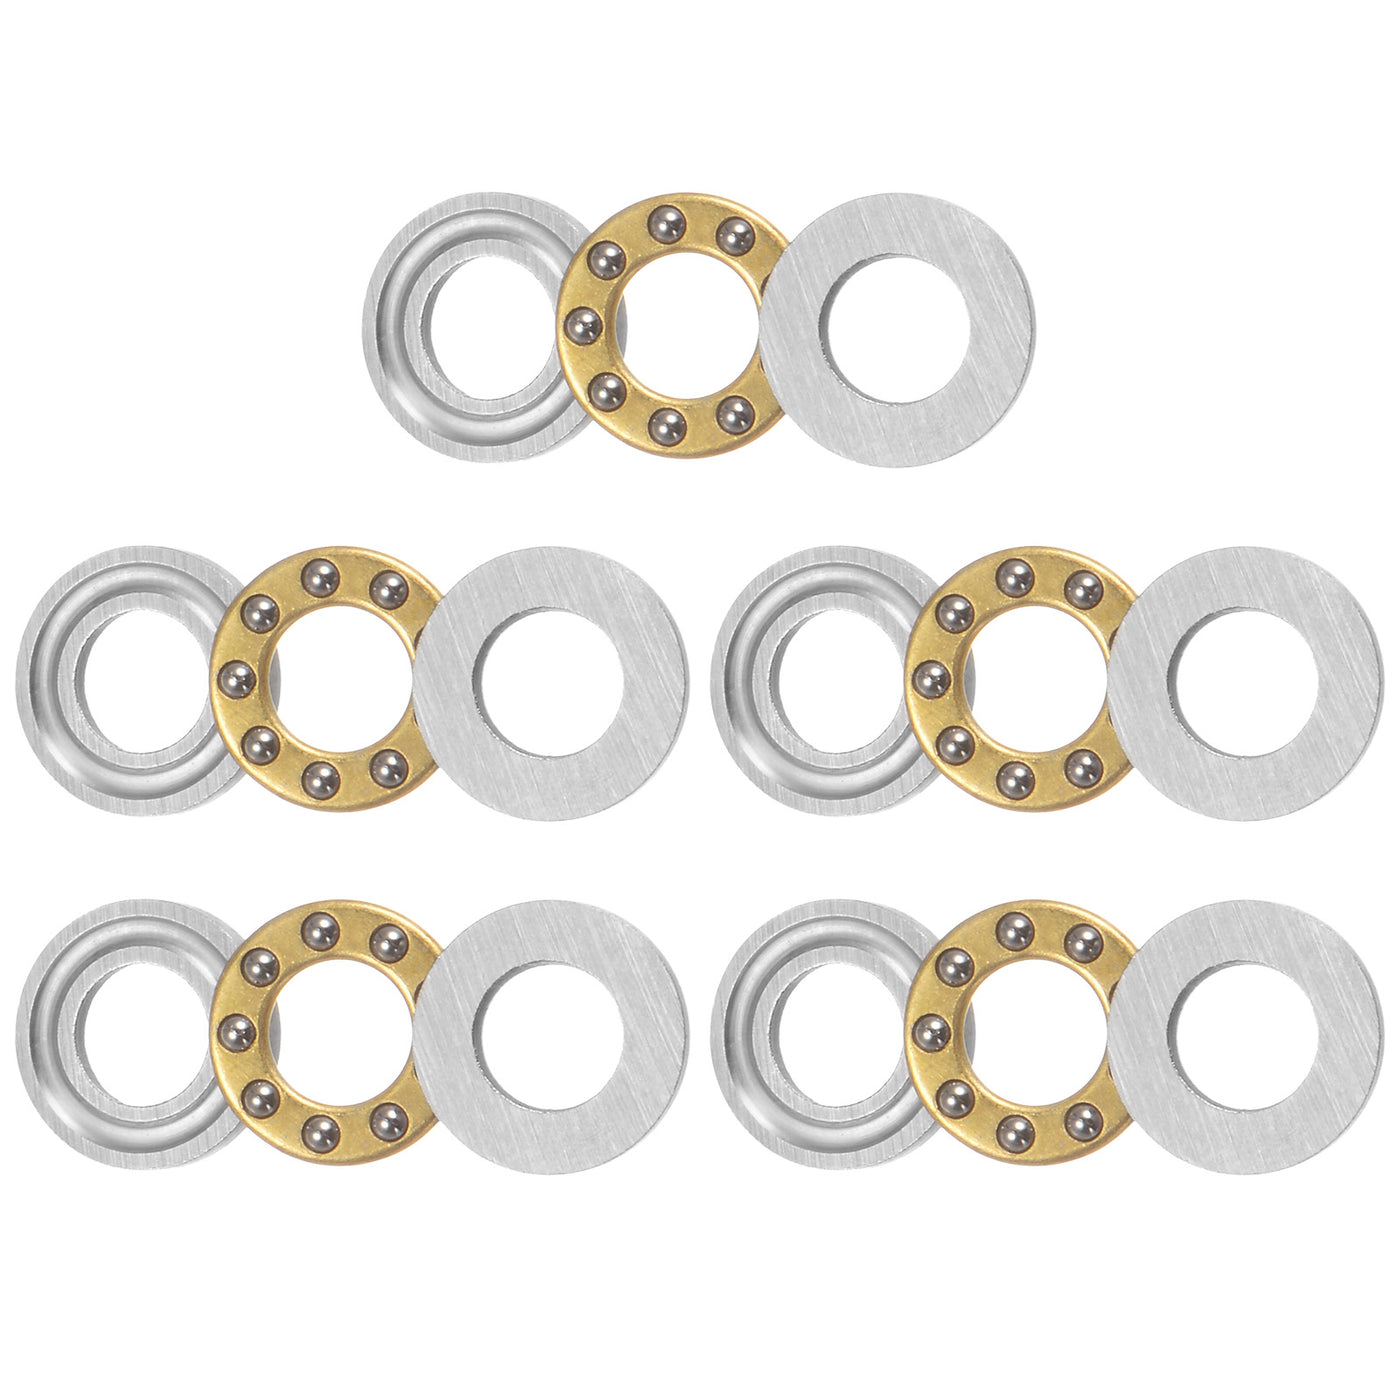 uxcell Uxcell F5-10M Thrust Ball Bearing 5x10x4mm Brass with Washers ABEC3 5pcs